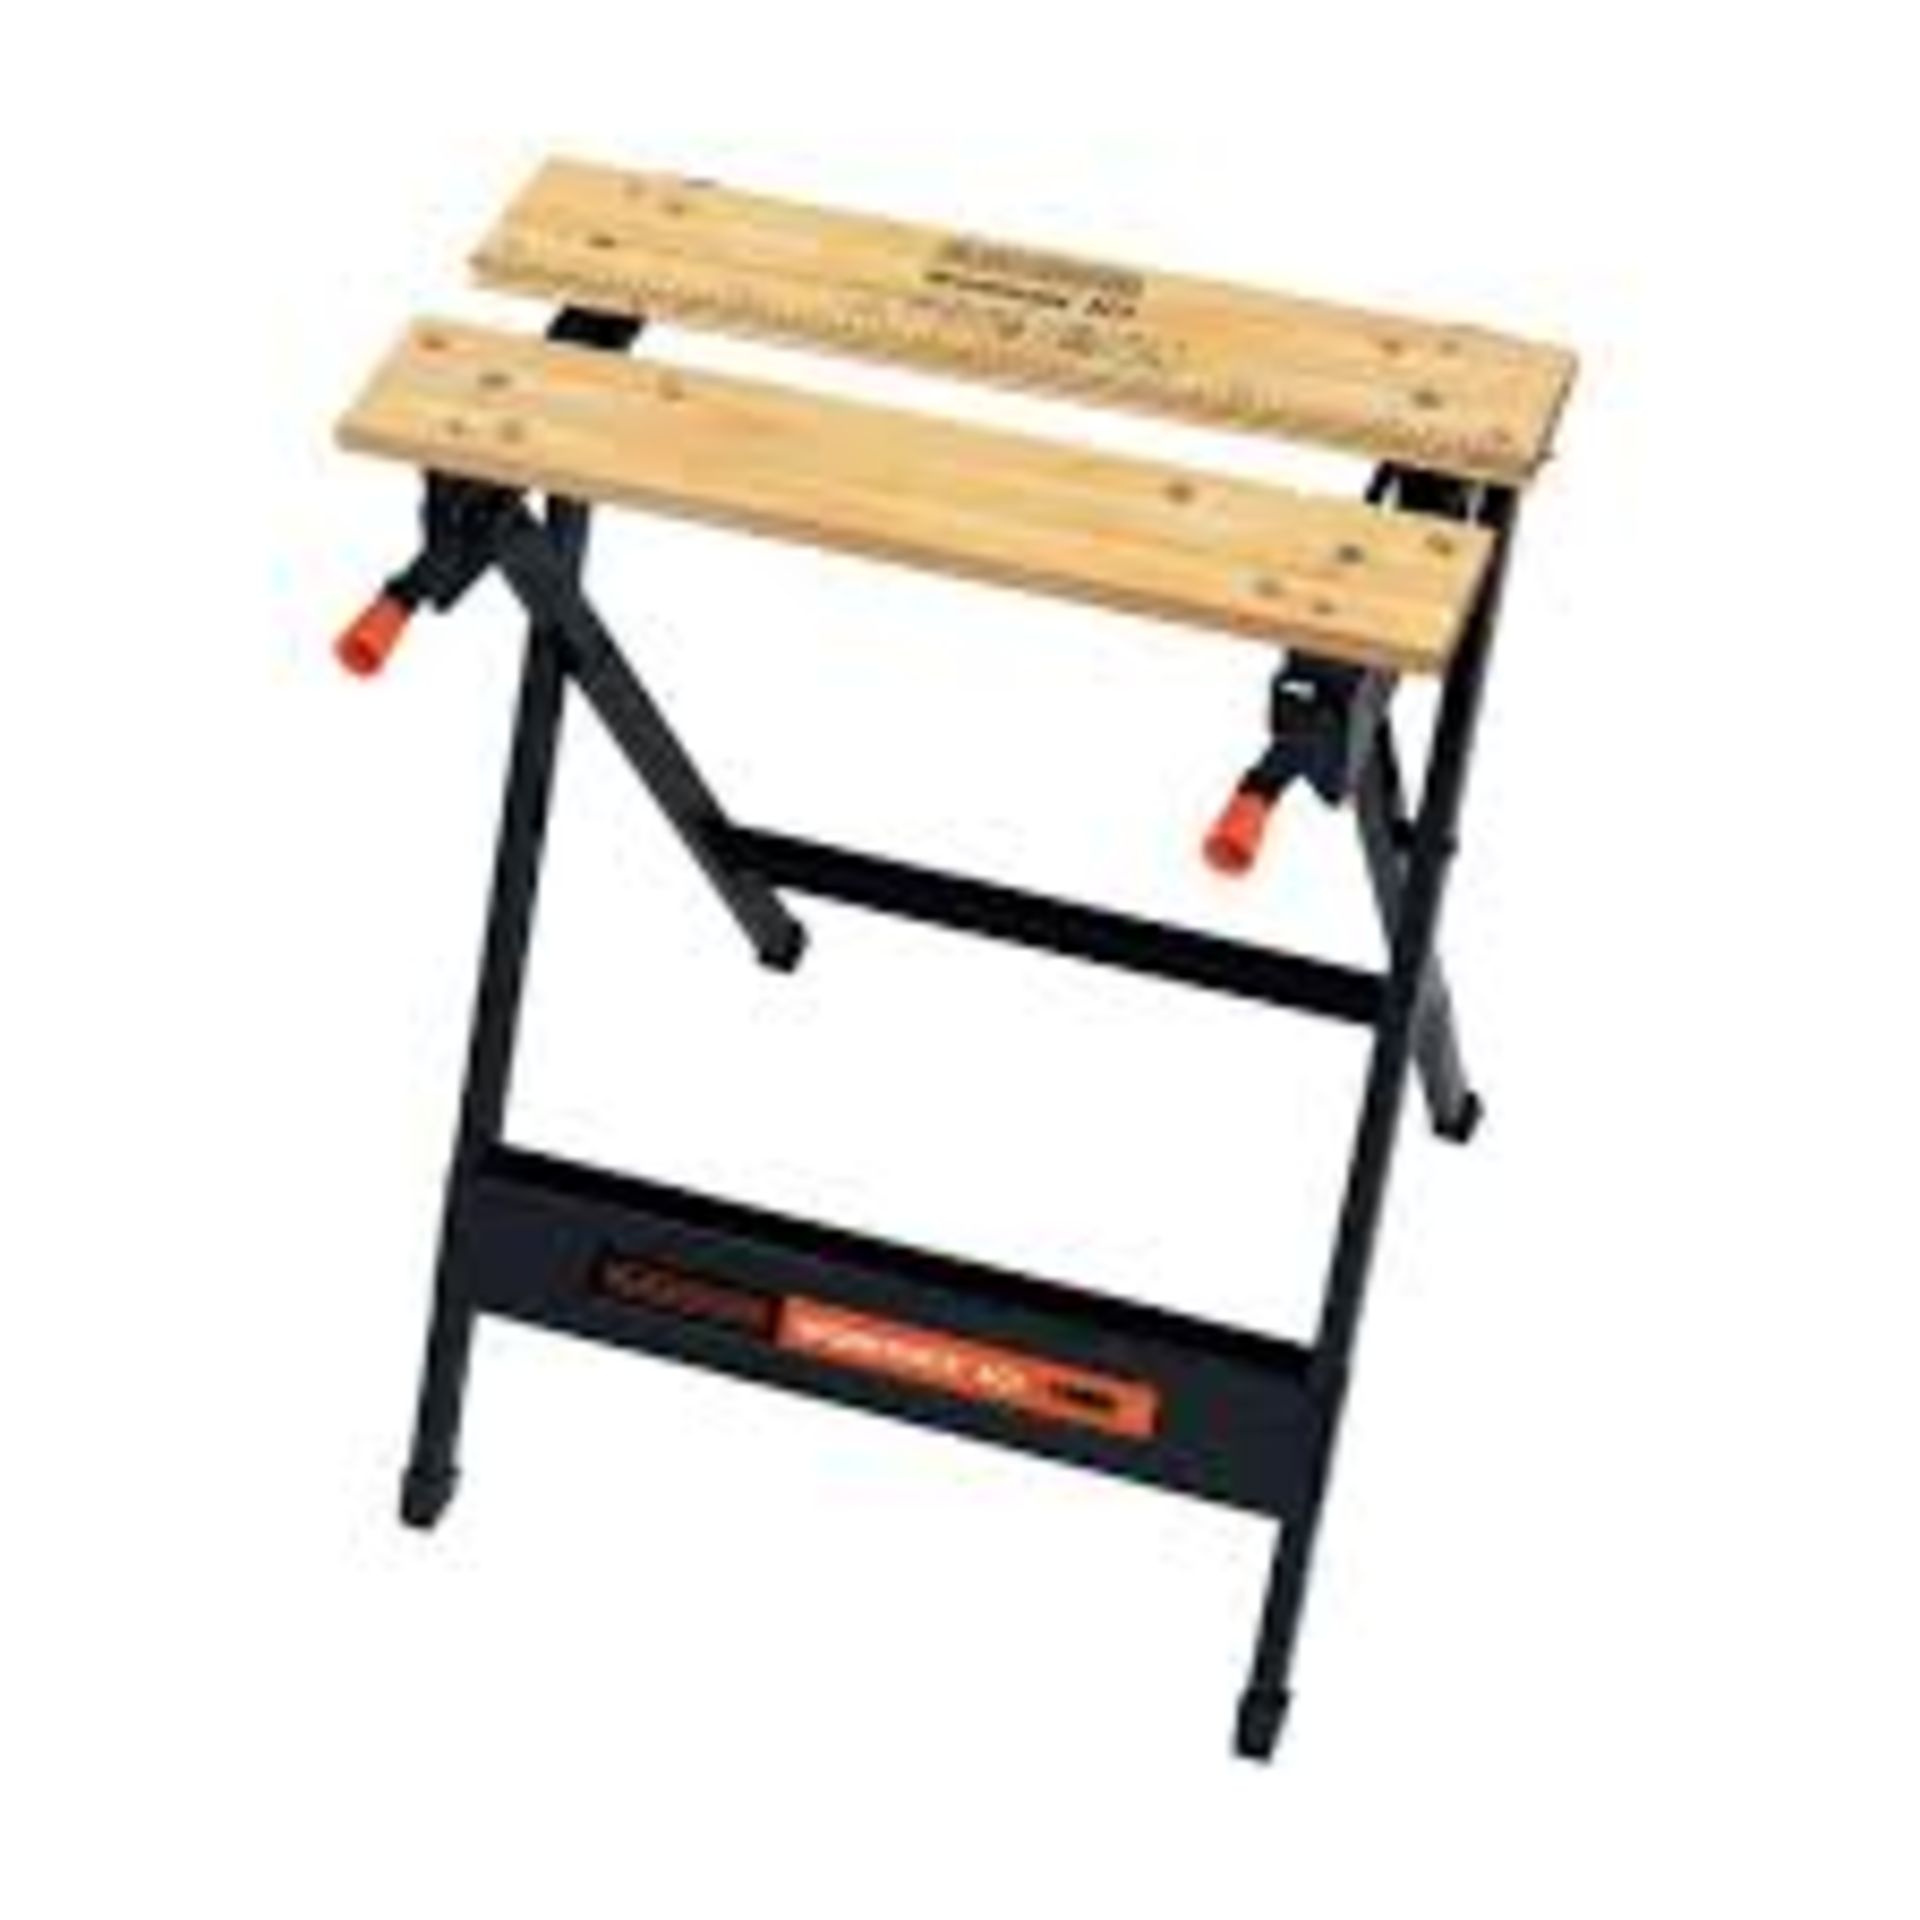 Black and Decker WM301 Series Workmate Work Bench Vice Stand. - R13a.10.